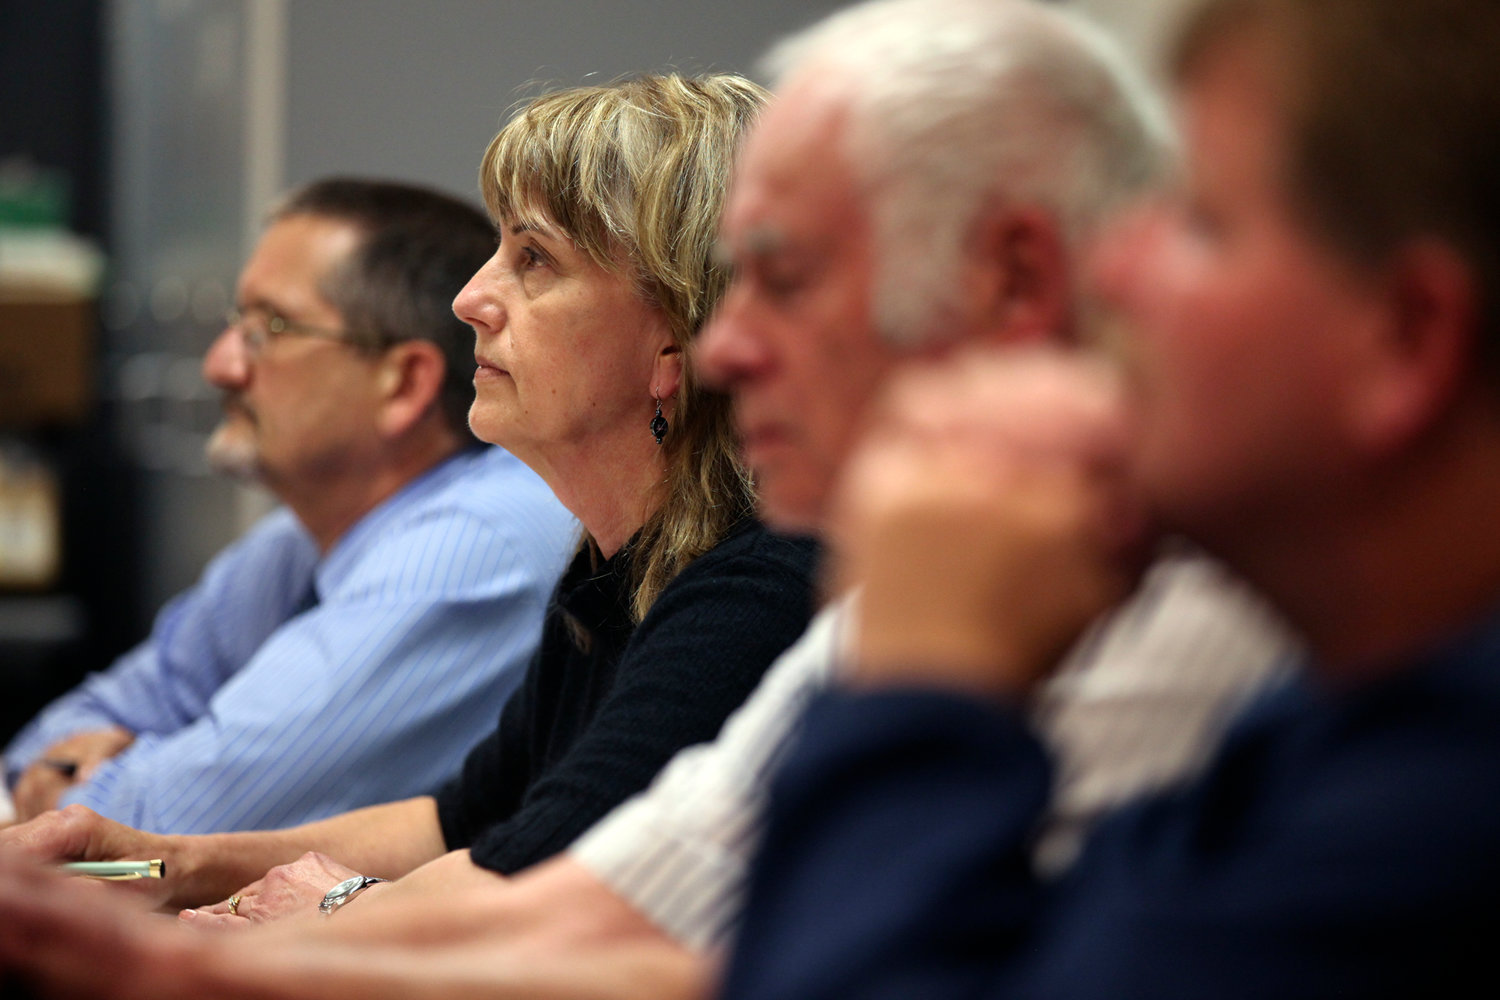 Members of the Onalaska School Board listen to comments from a standing-room crowd about the elementary school's sex education policy during a meeting Monday evening.